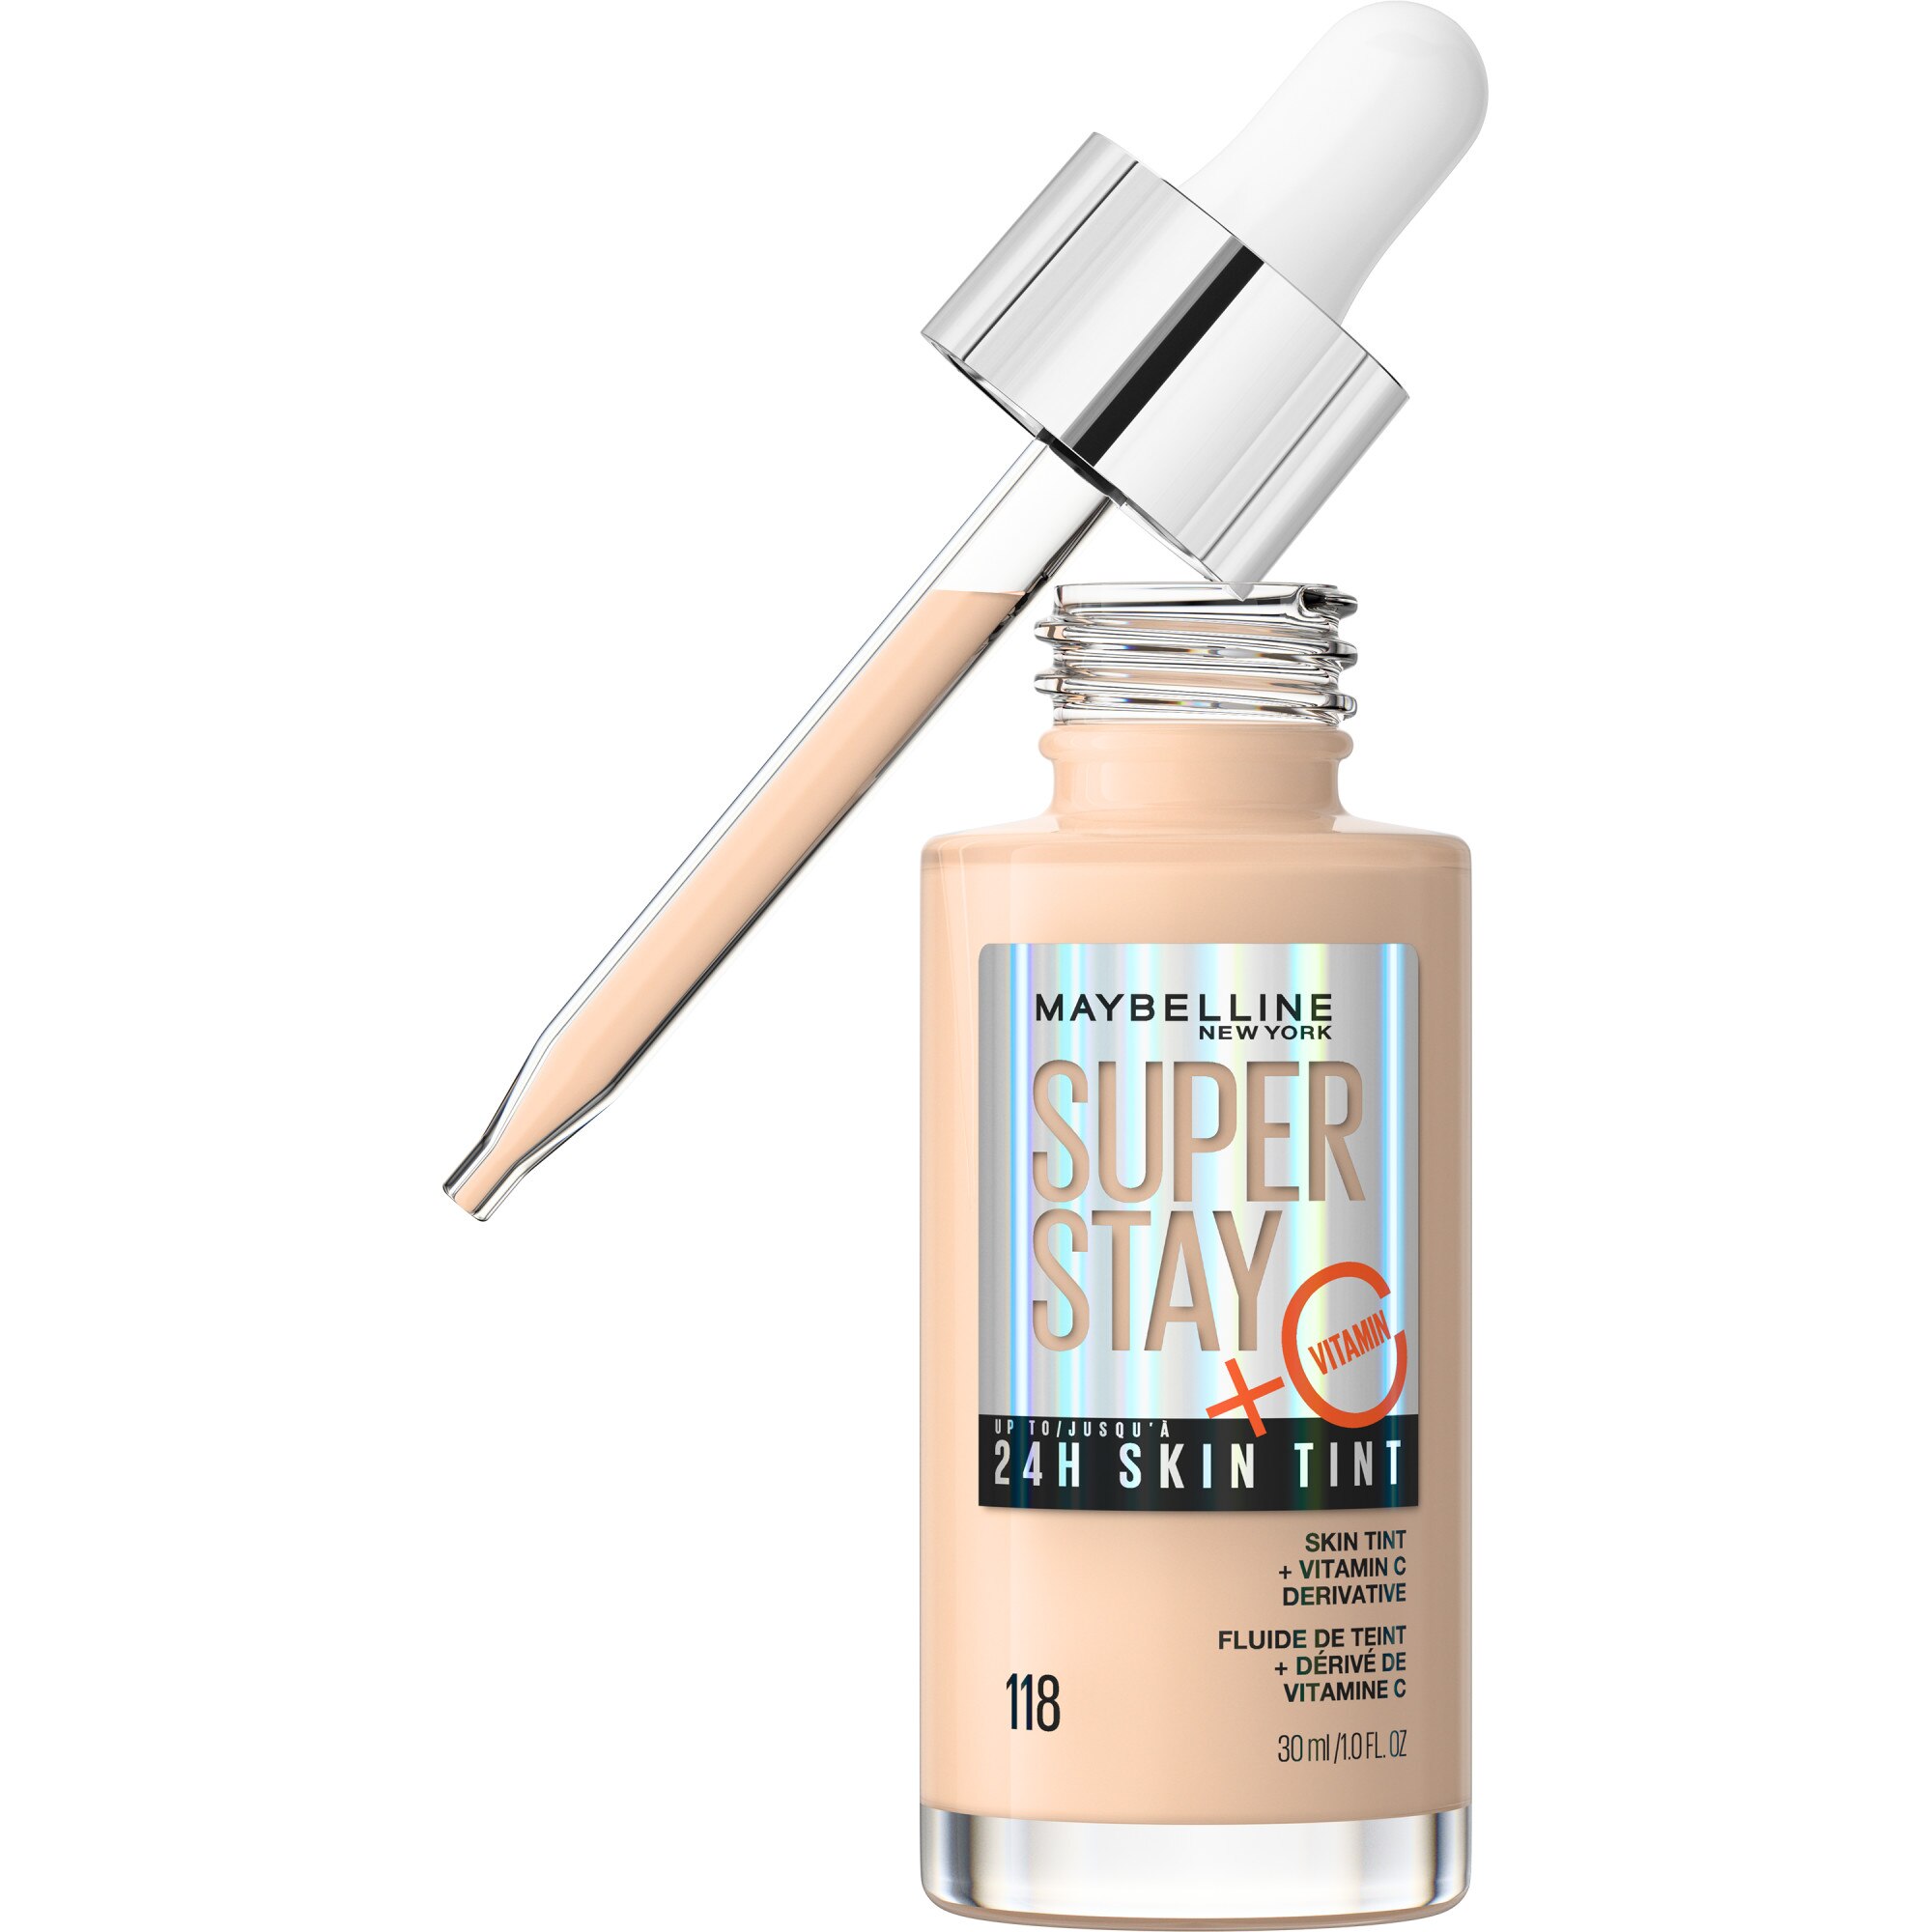 Maybelline New York Super Stay Up To 24HR Skin Tint With Vitamin C, 118, 1 Oz , CVS